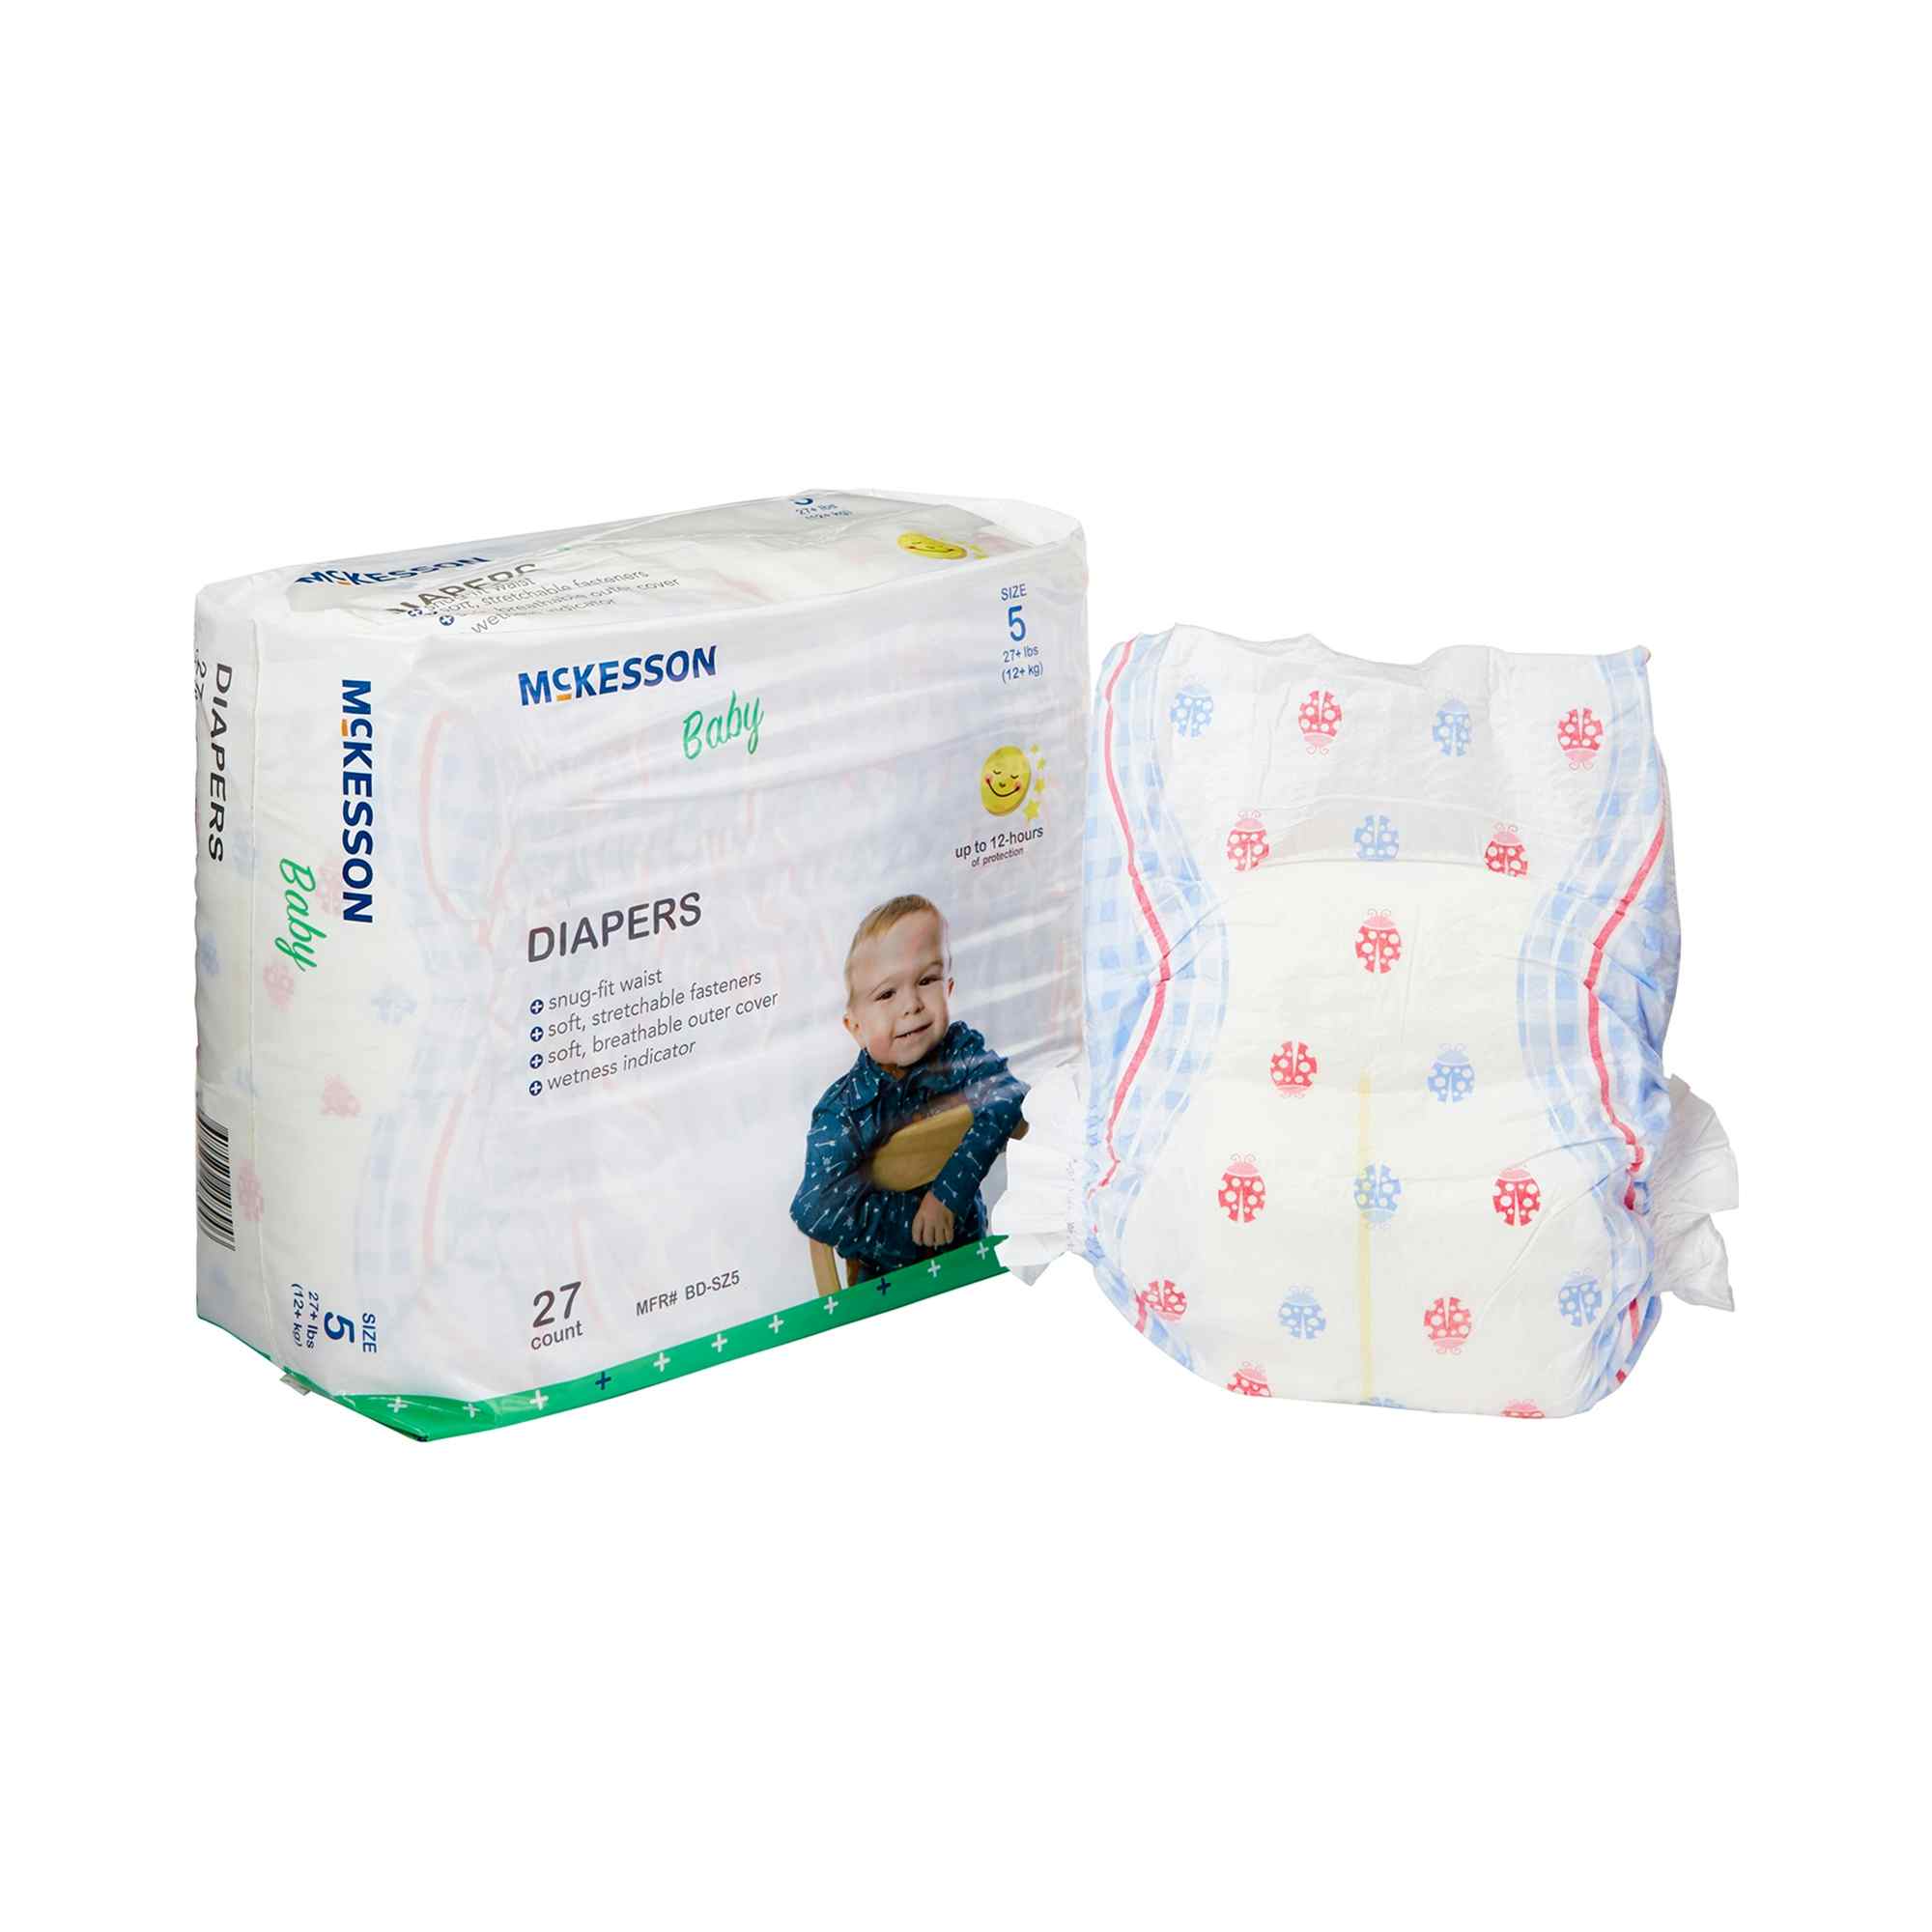 McKesson Disposable Unisex Baby Diaper with Tabs, Moderate, BD-SZ5, Size 5 Over 27 lbs - Bag of 27